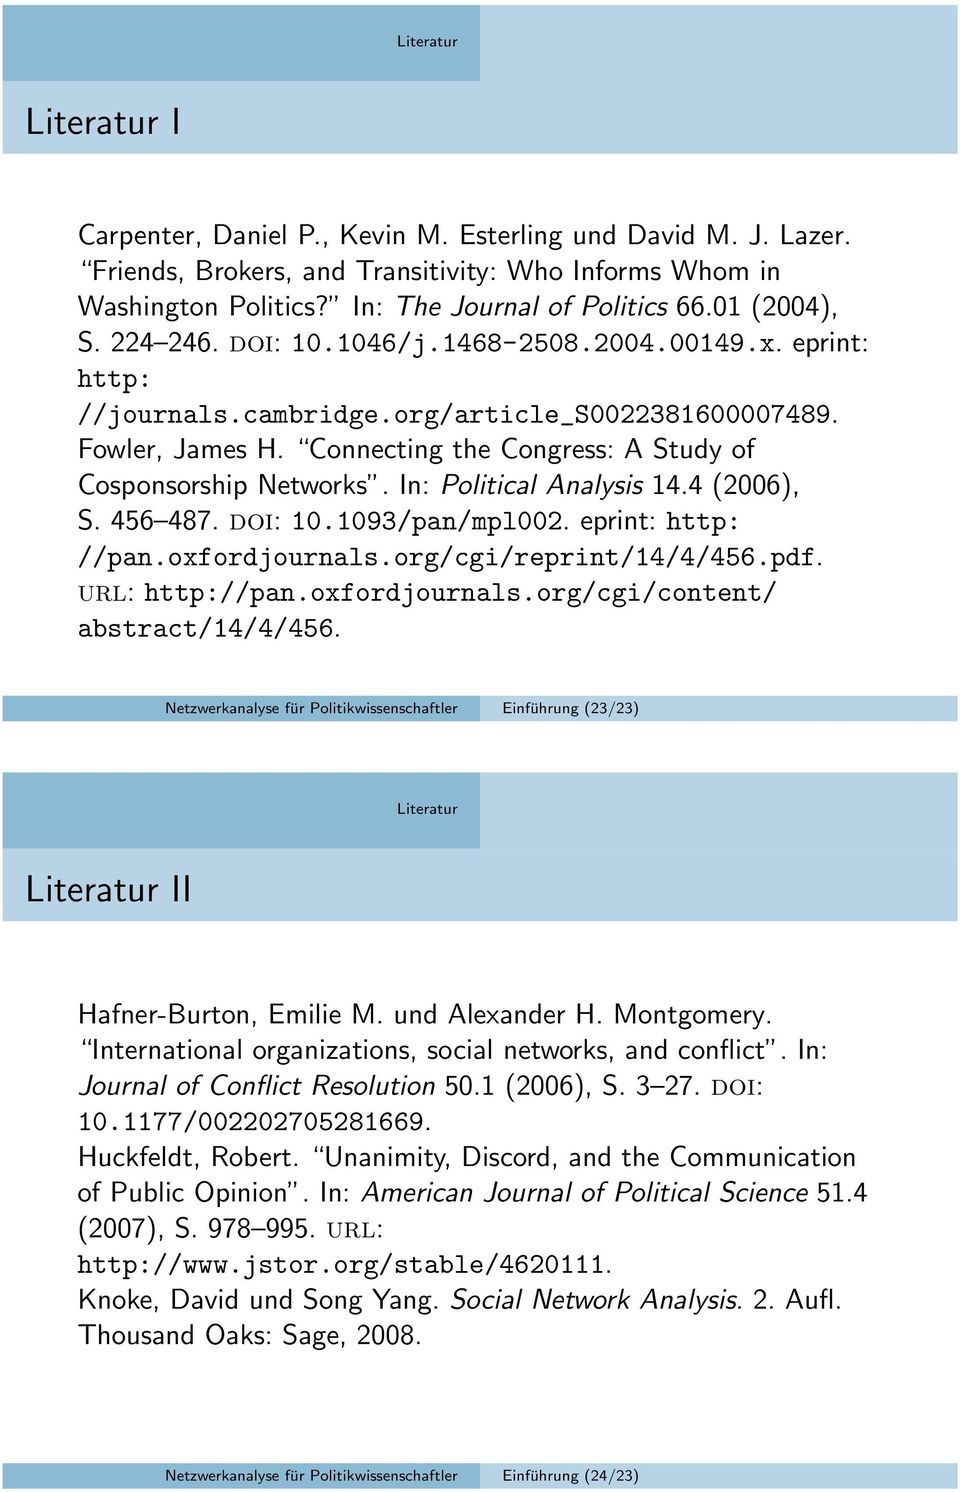 Connecting the Congress: A Study of Cosponsorship Networks. In: Political Analysis 14.4 (2006), S. 456 487. doi: 10.1093/pan/mpl002. eprint: http: //pan.oxfordjournals.org/cgi/reprint/14/4/456.pdf.